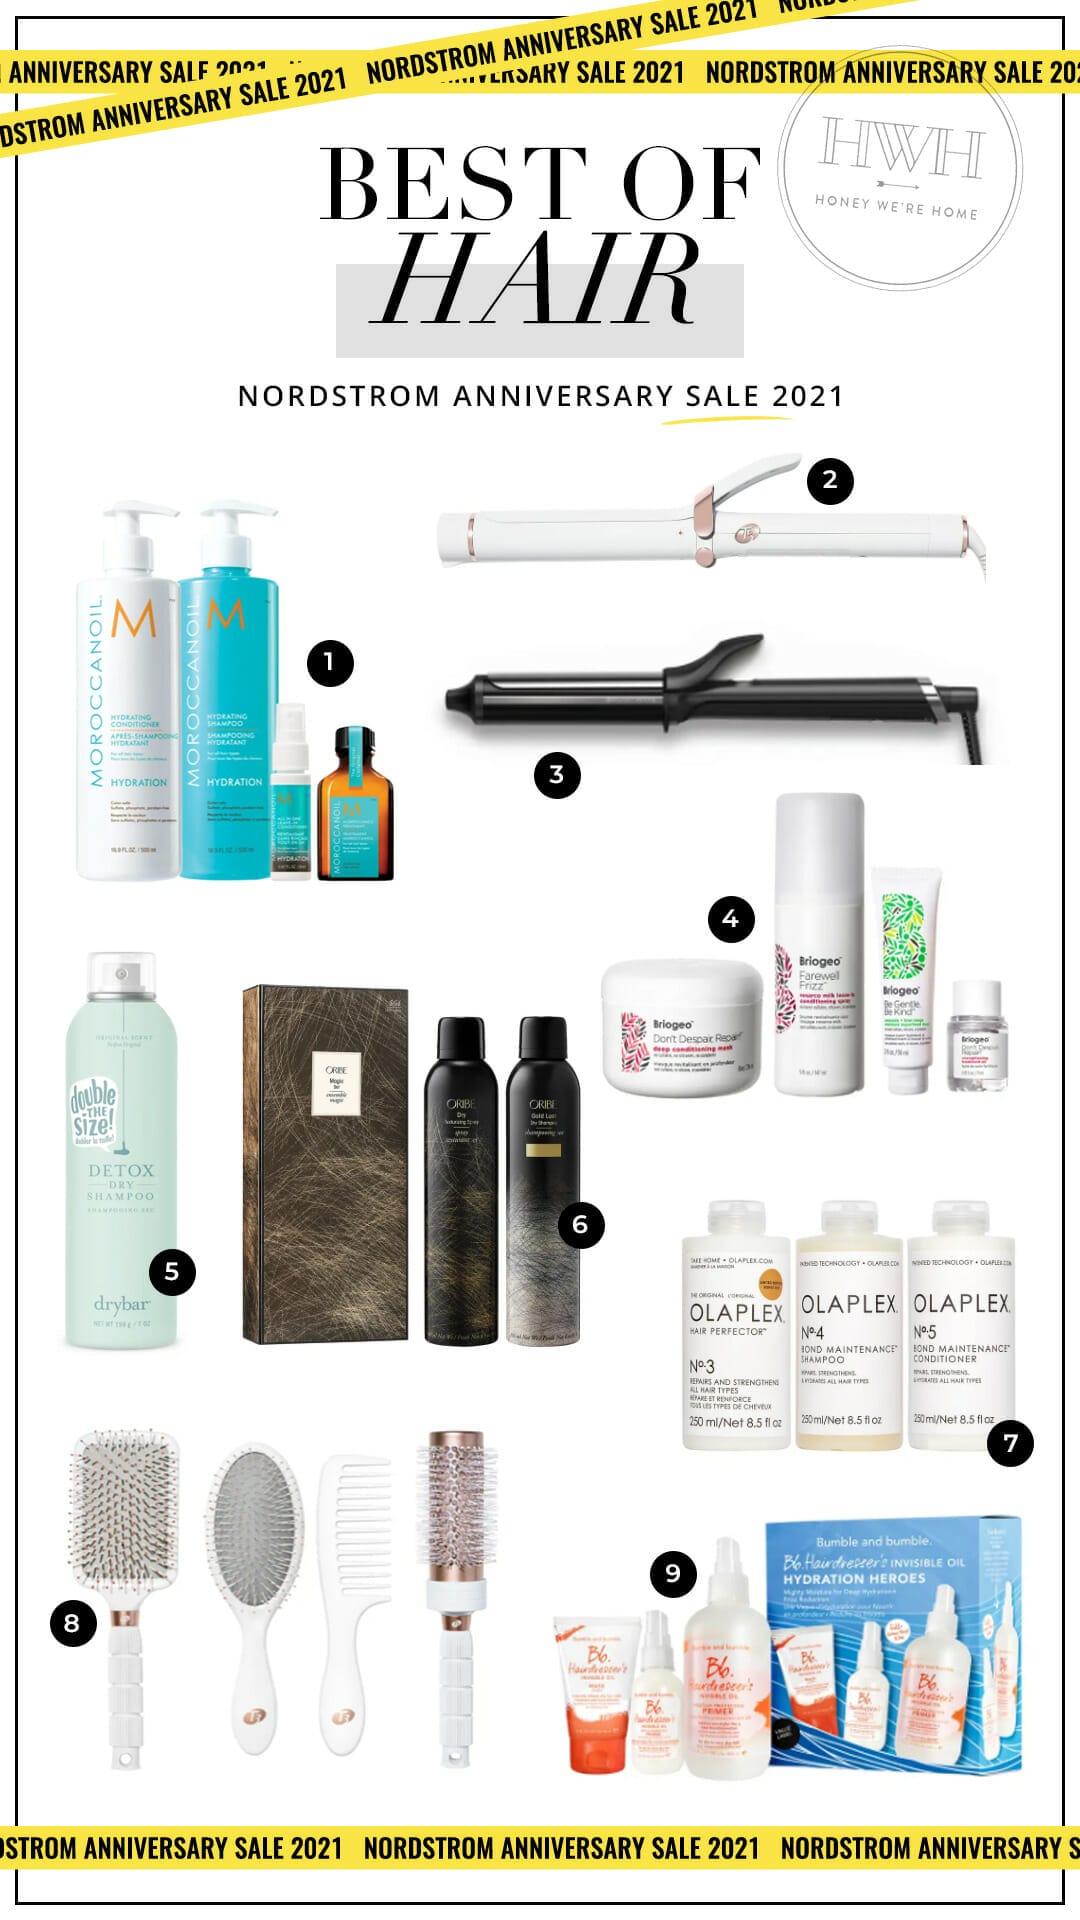 Nordstrom Anniversary Sale | Best of Hair, Beauty, Home & Gifts